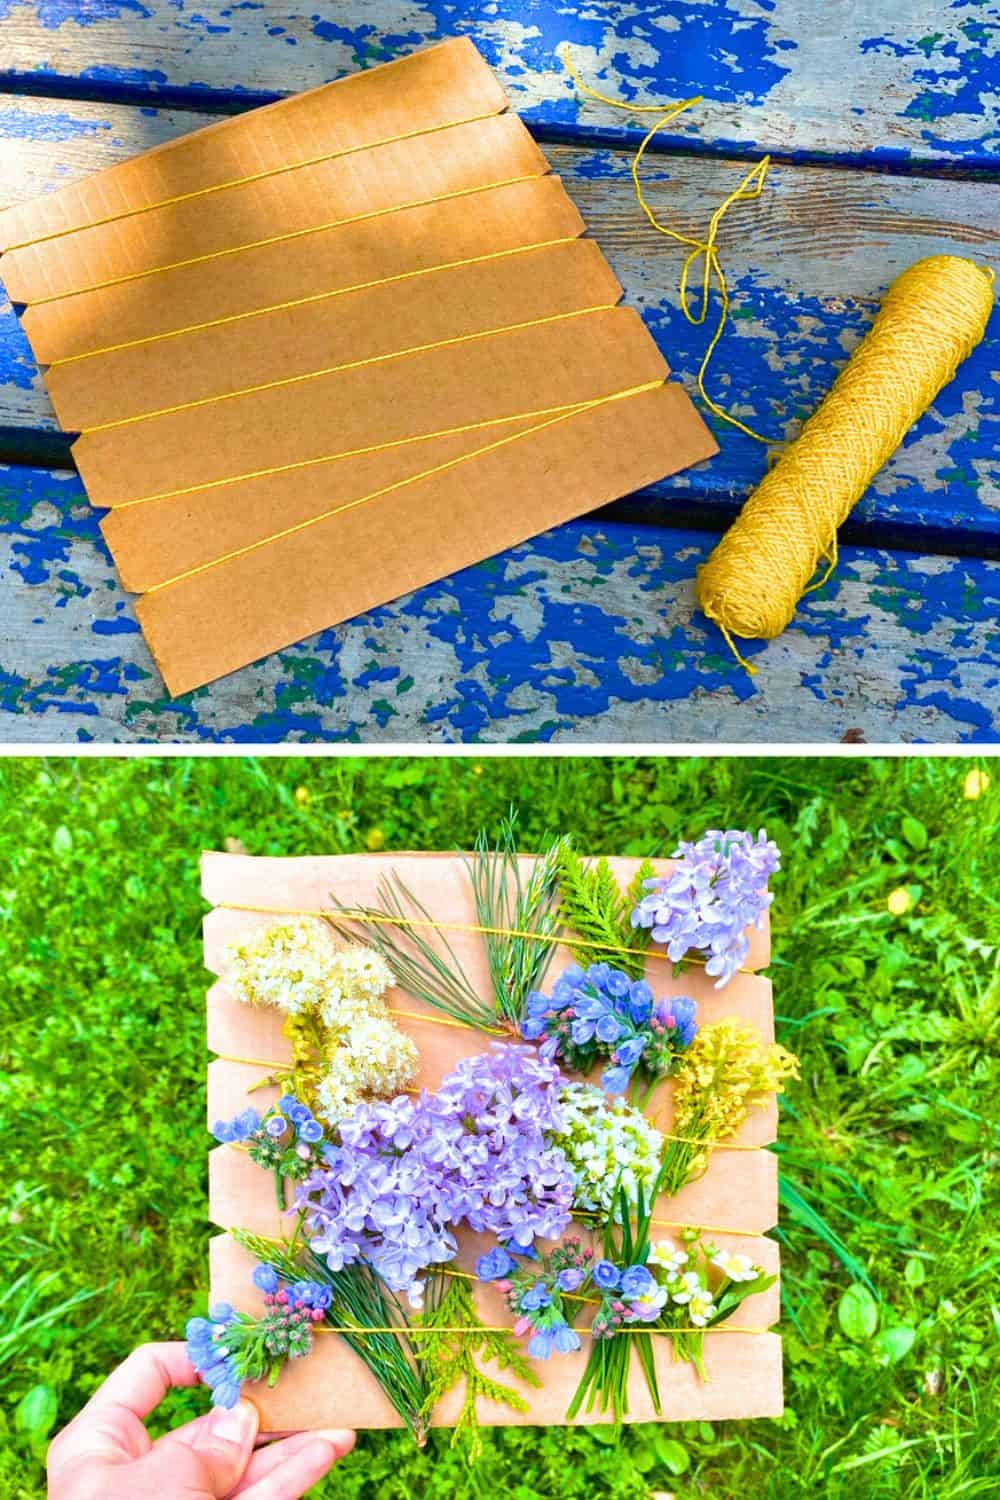 Nature Walk Craft Keeper Card For Flower Bouquets (Summer Kids Activities) - cardboard with yard on it with fresh flowers tucked into the yarn